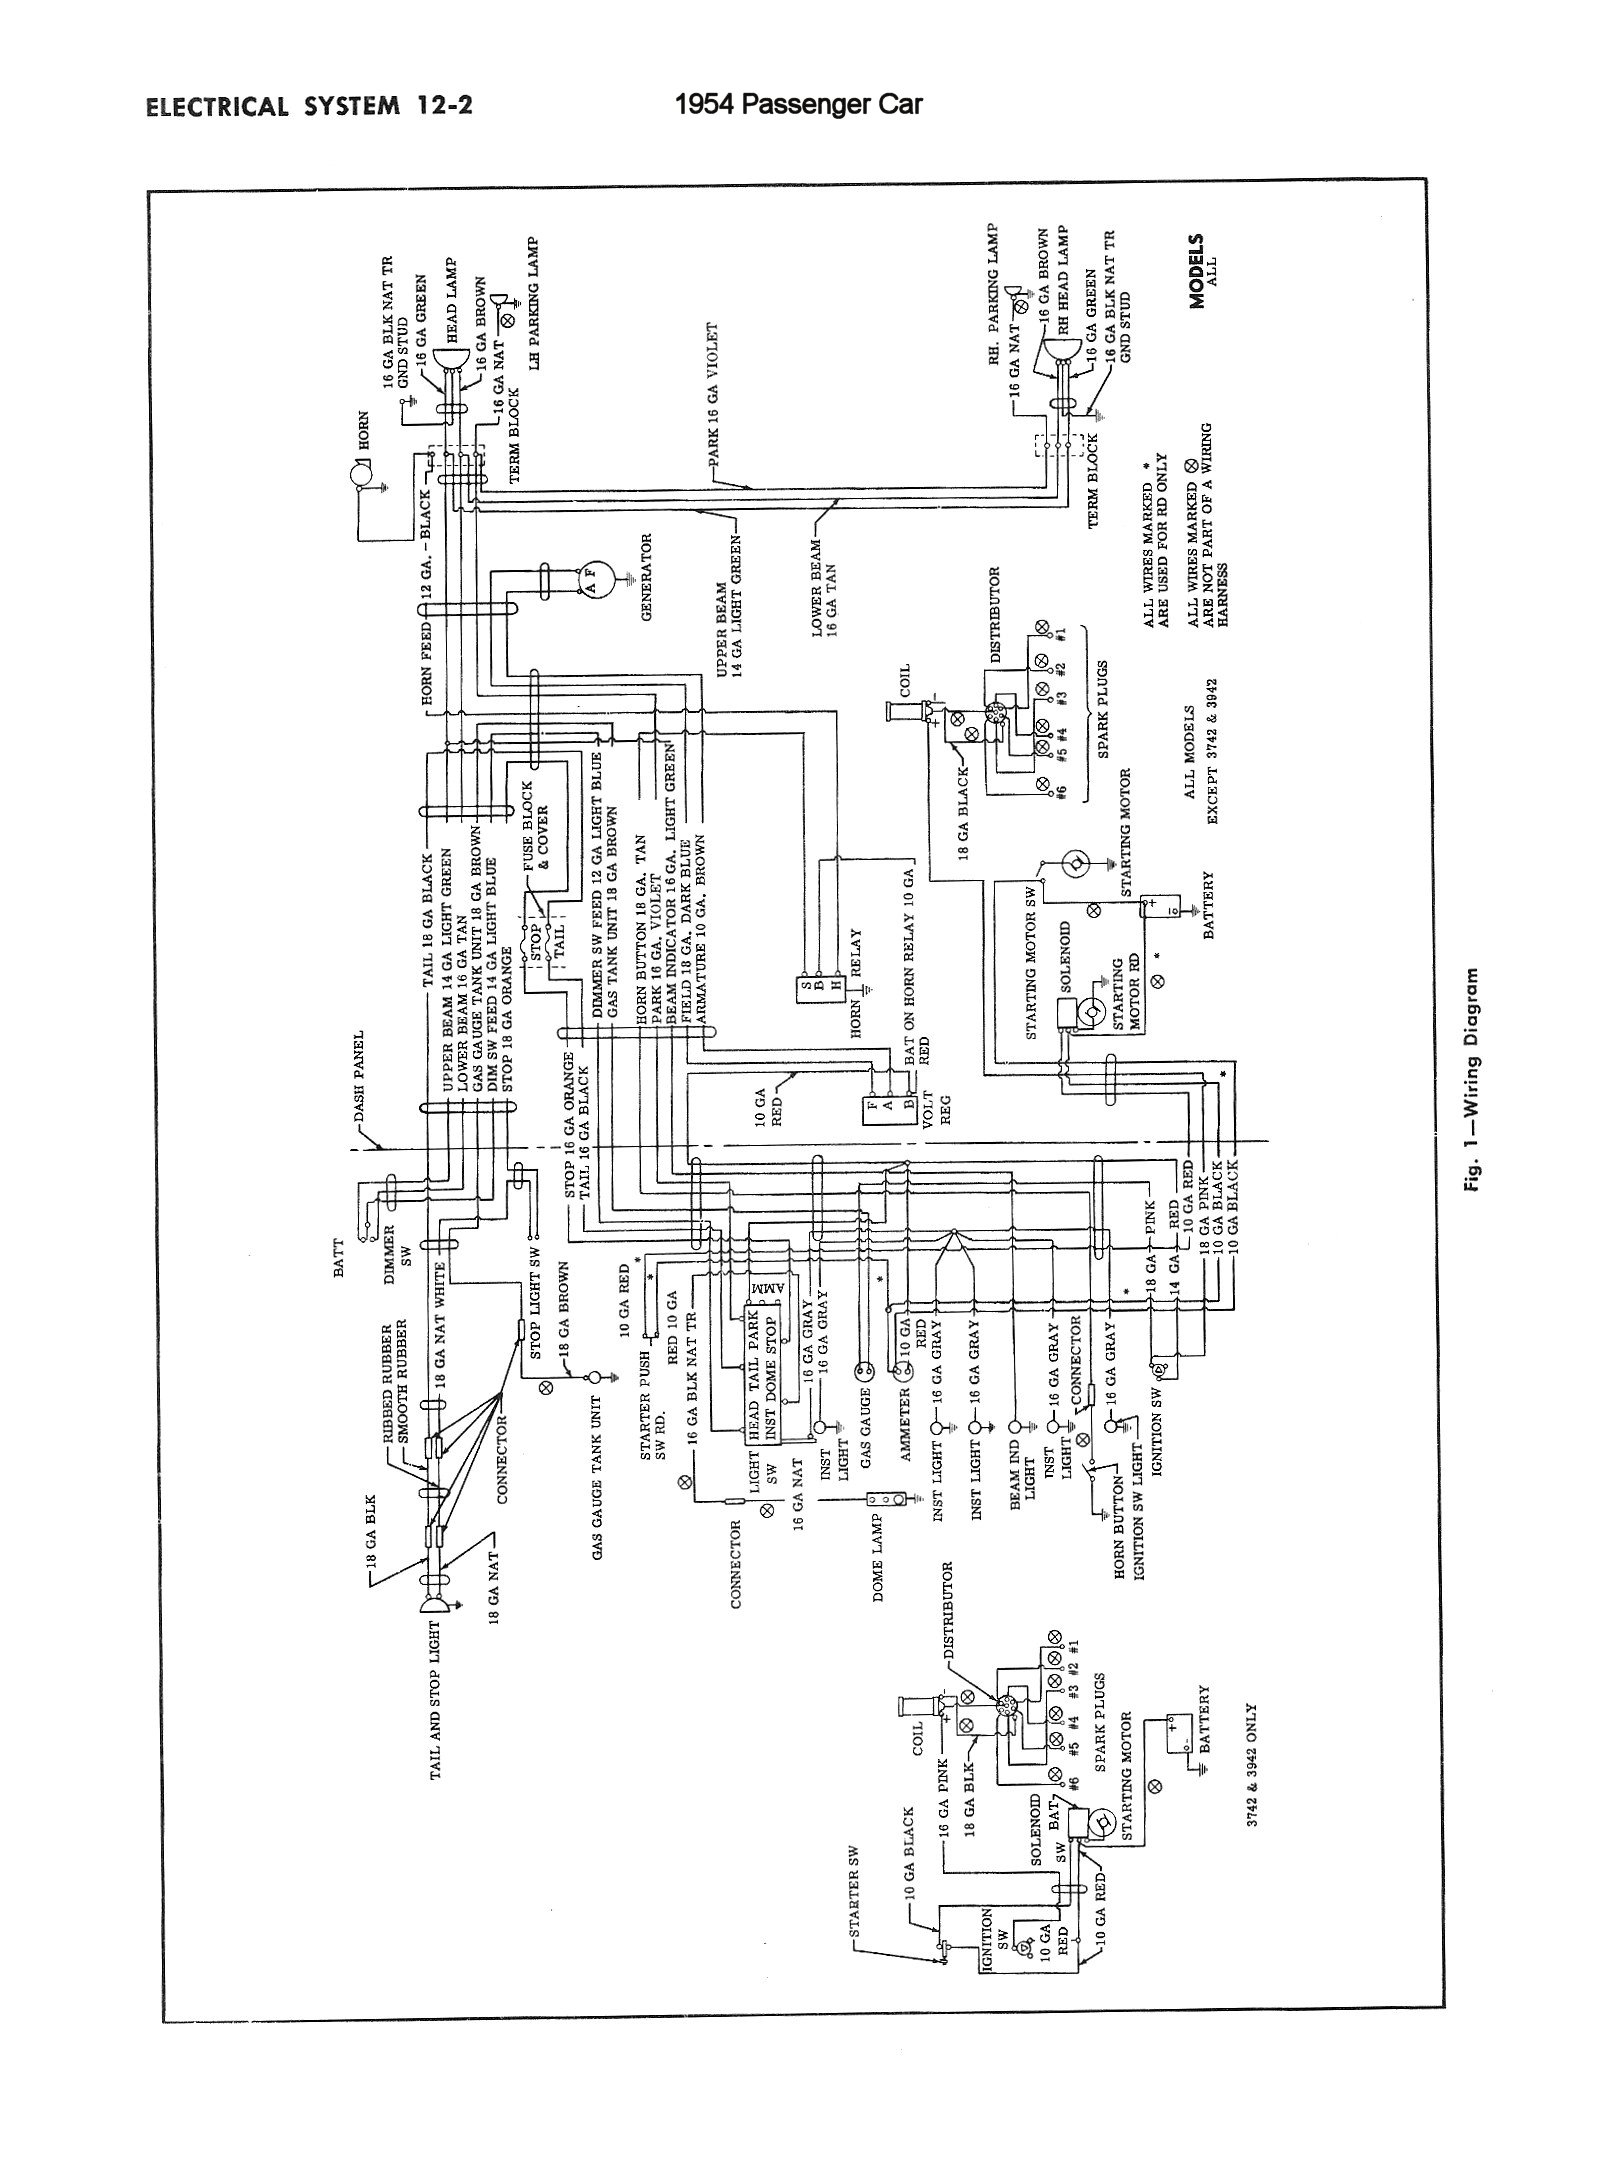 Chevy Wiring Diagrams - Chevy Wiring Harness Diagram